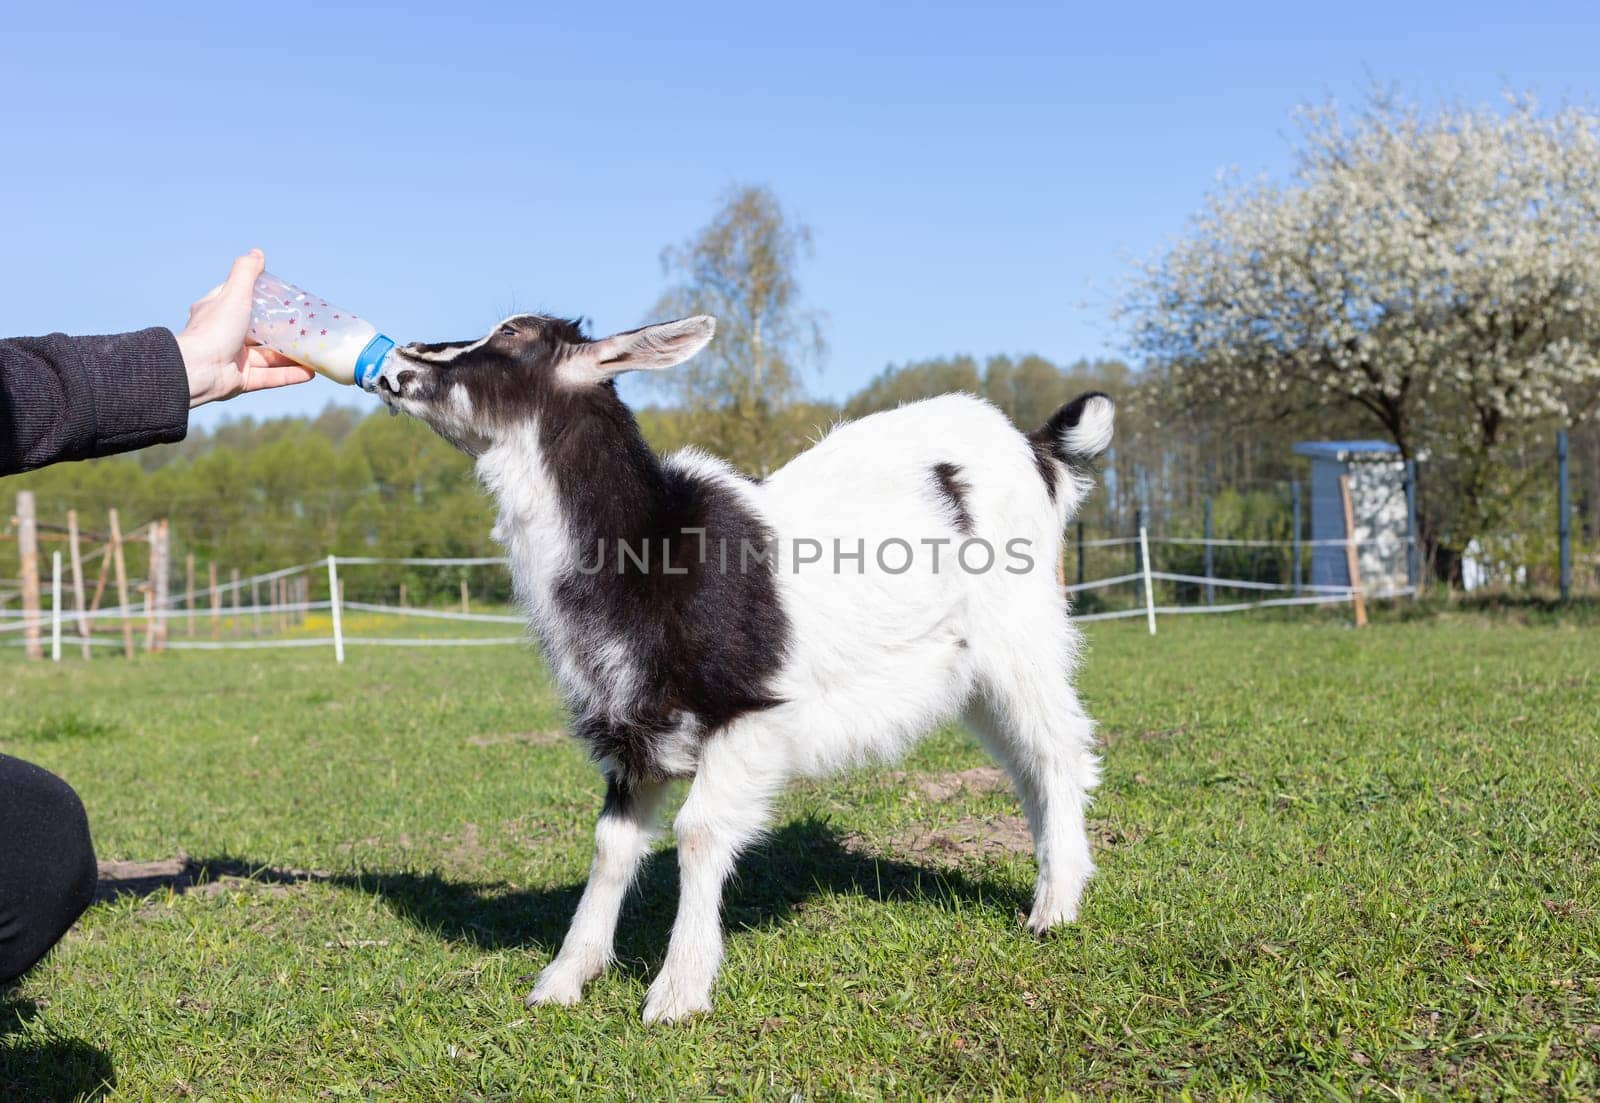 Person Feeding Babies Goat With Milk From Bottle On Farm In Summer Or Spring Time. Domestic Animals Care, Raising. Meadow, Green Blooming Trees On Background. Horizontal Plane by netatsi